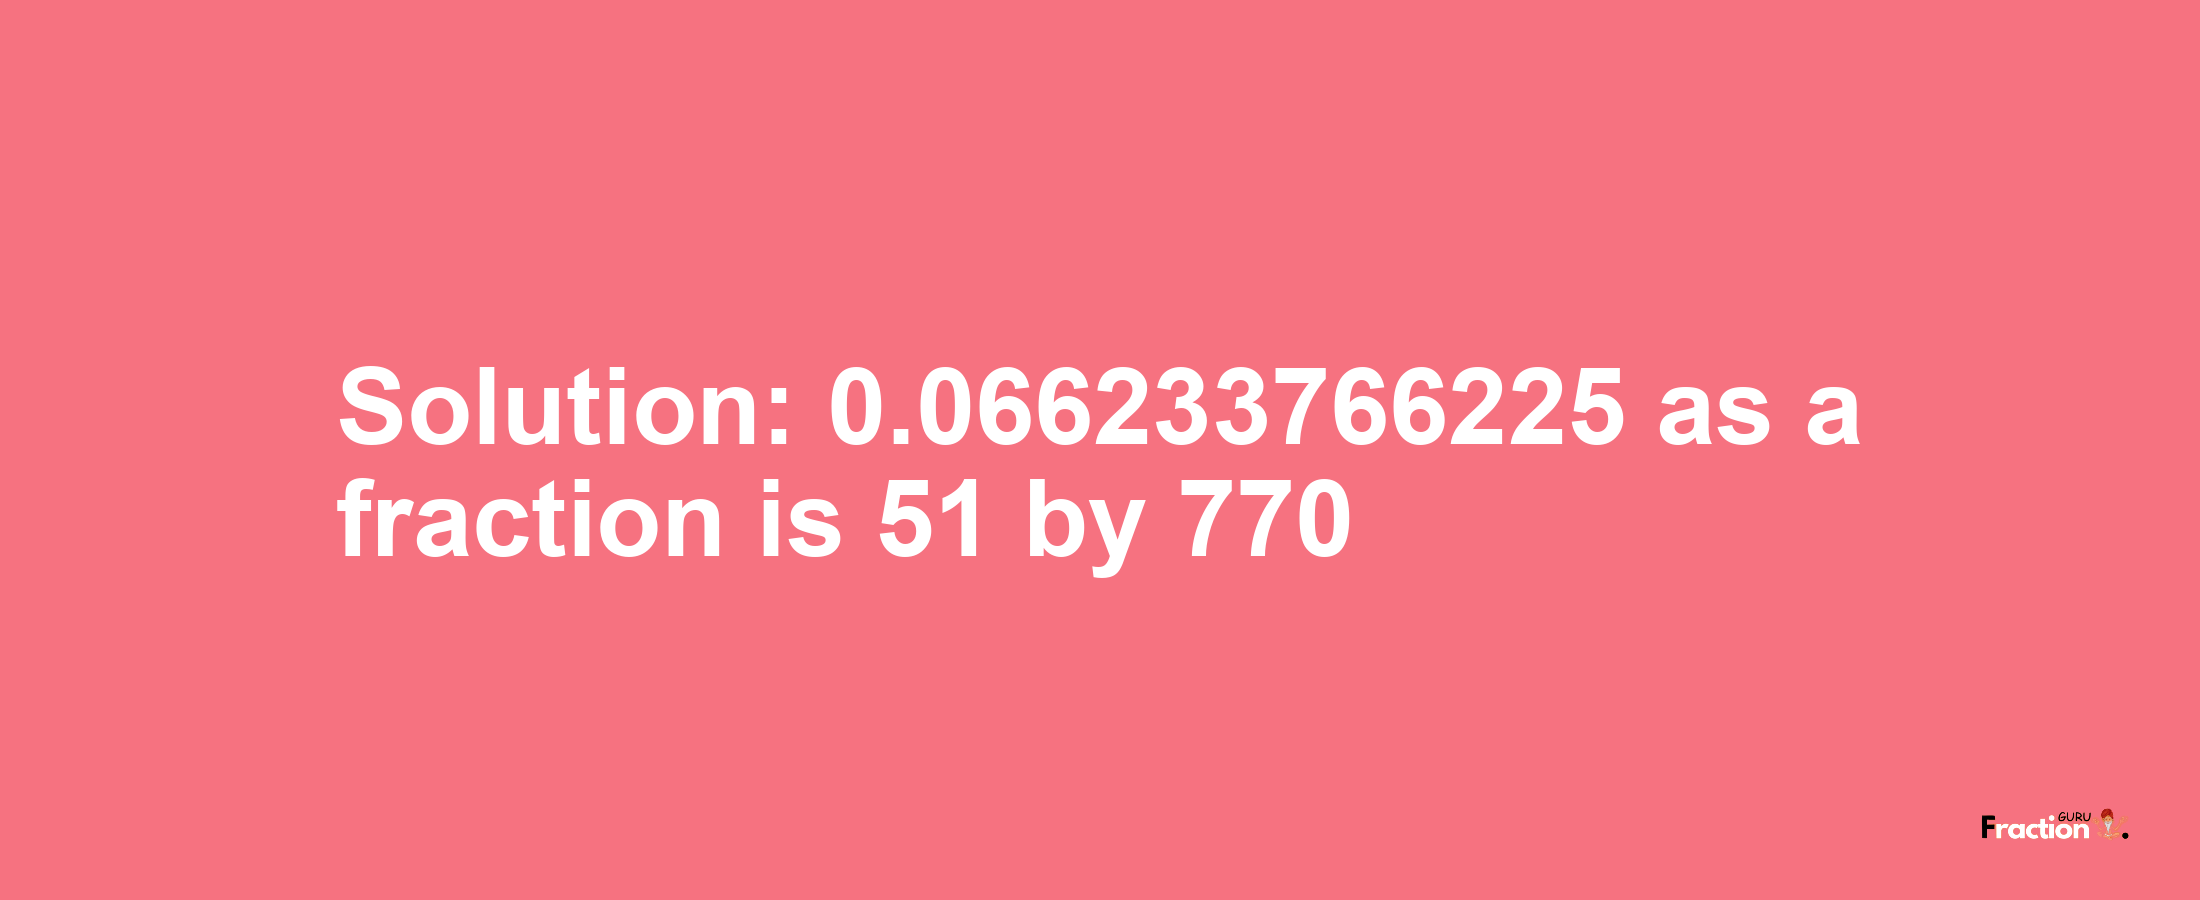 Solution:0.066233766225 as a fraction is 51/770